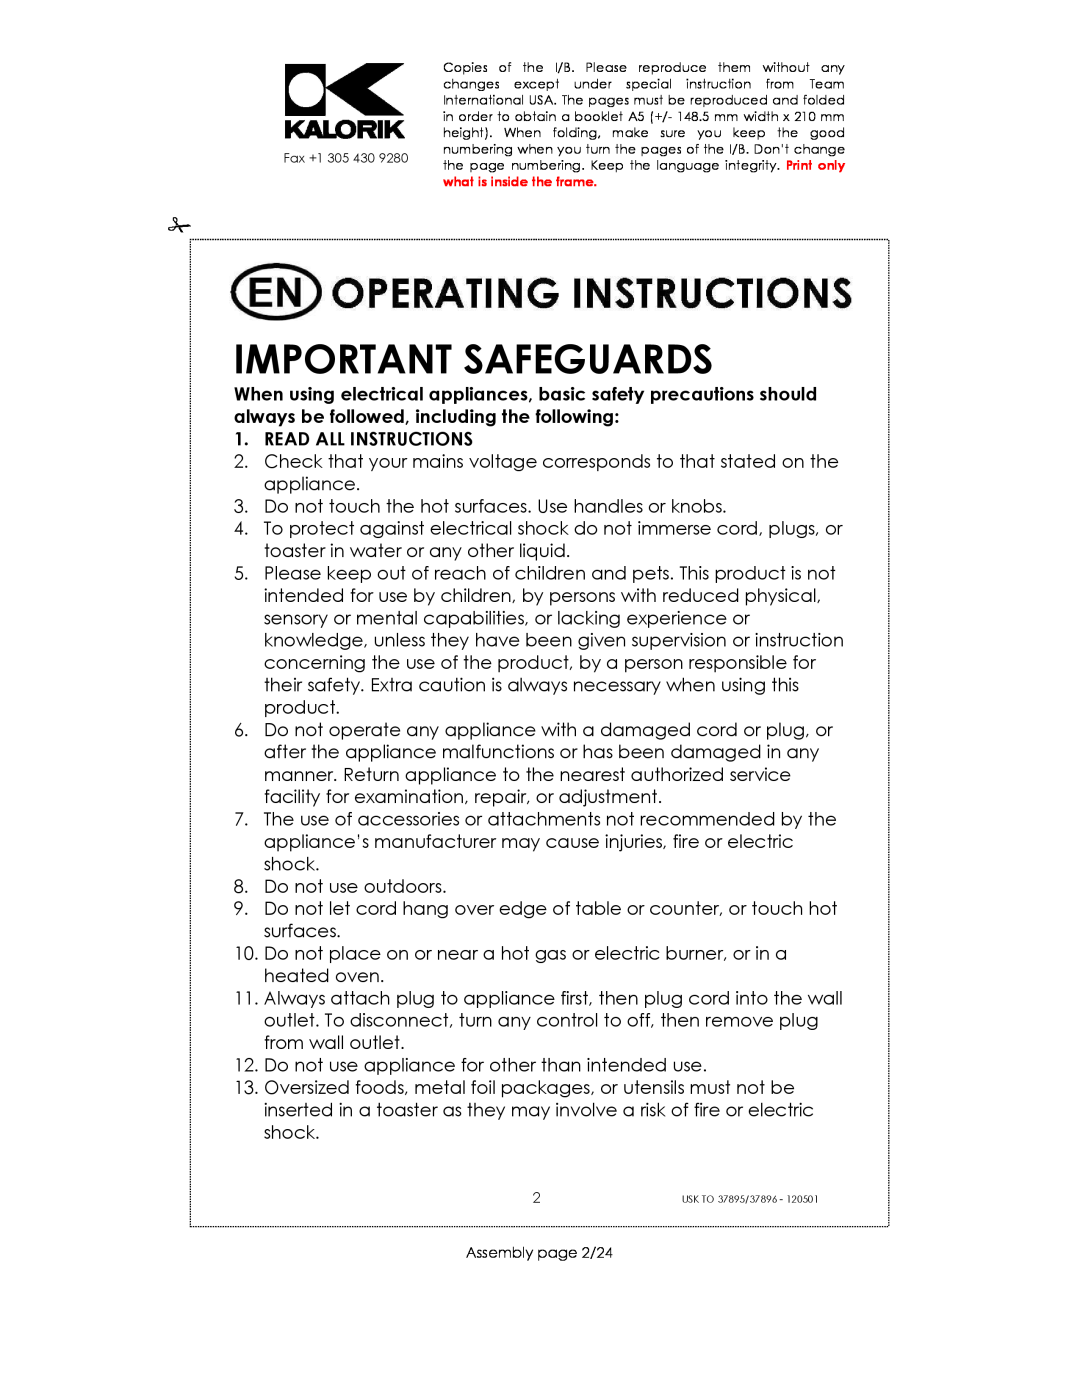 Kalorik USK TO 37896, USK TO 37895 manual Important Safeguards, Read All Instructions 